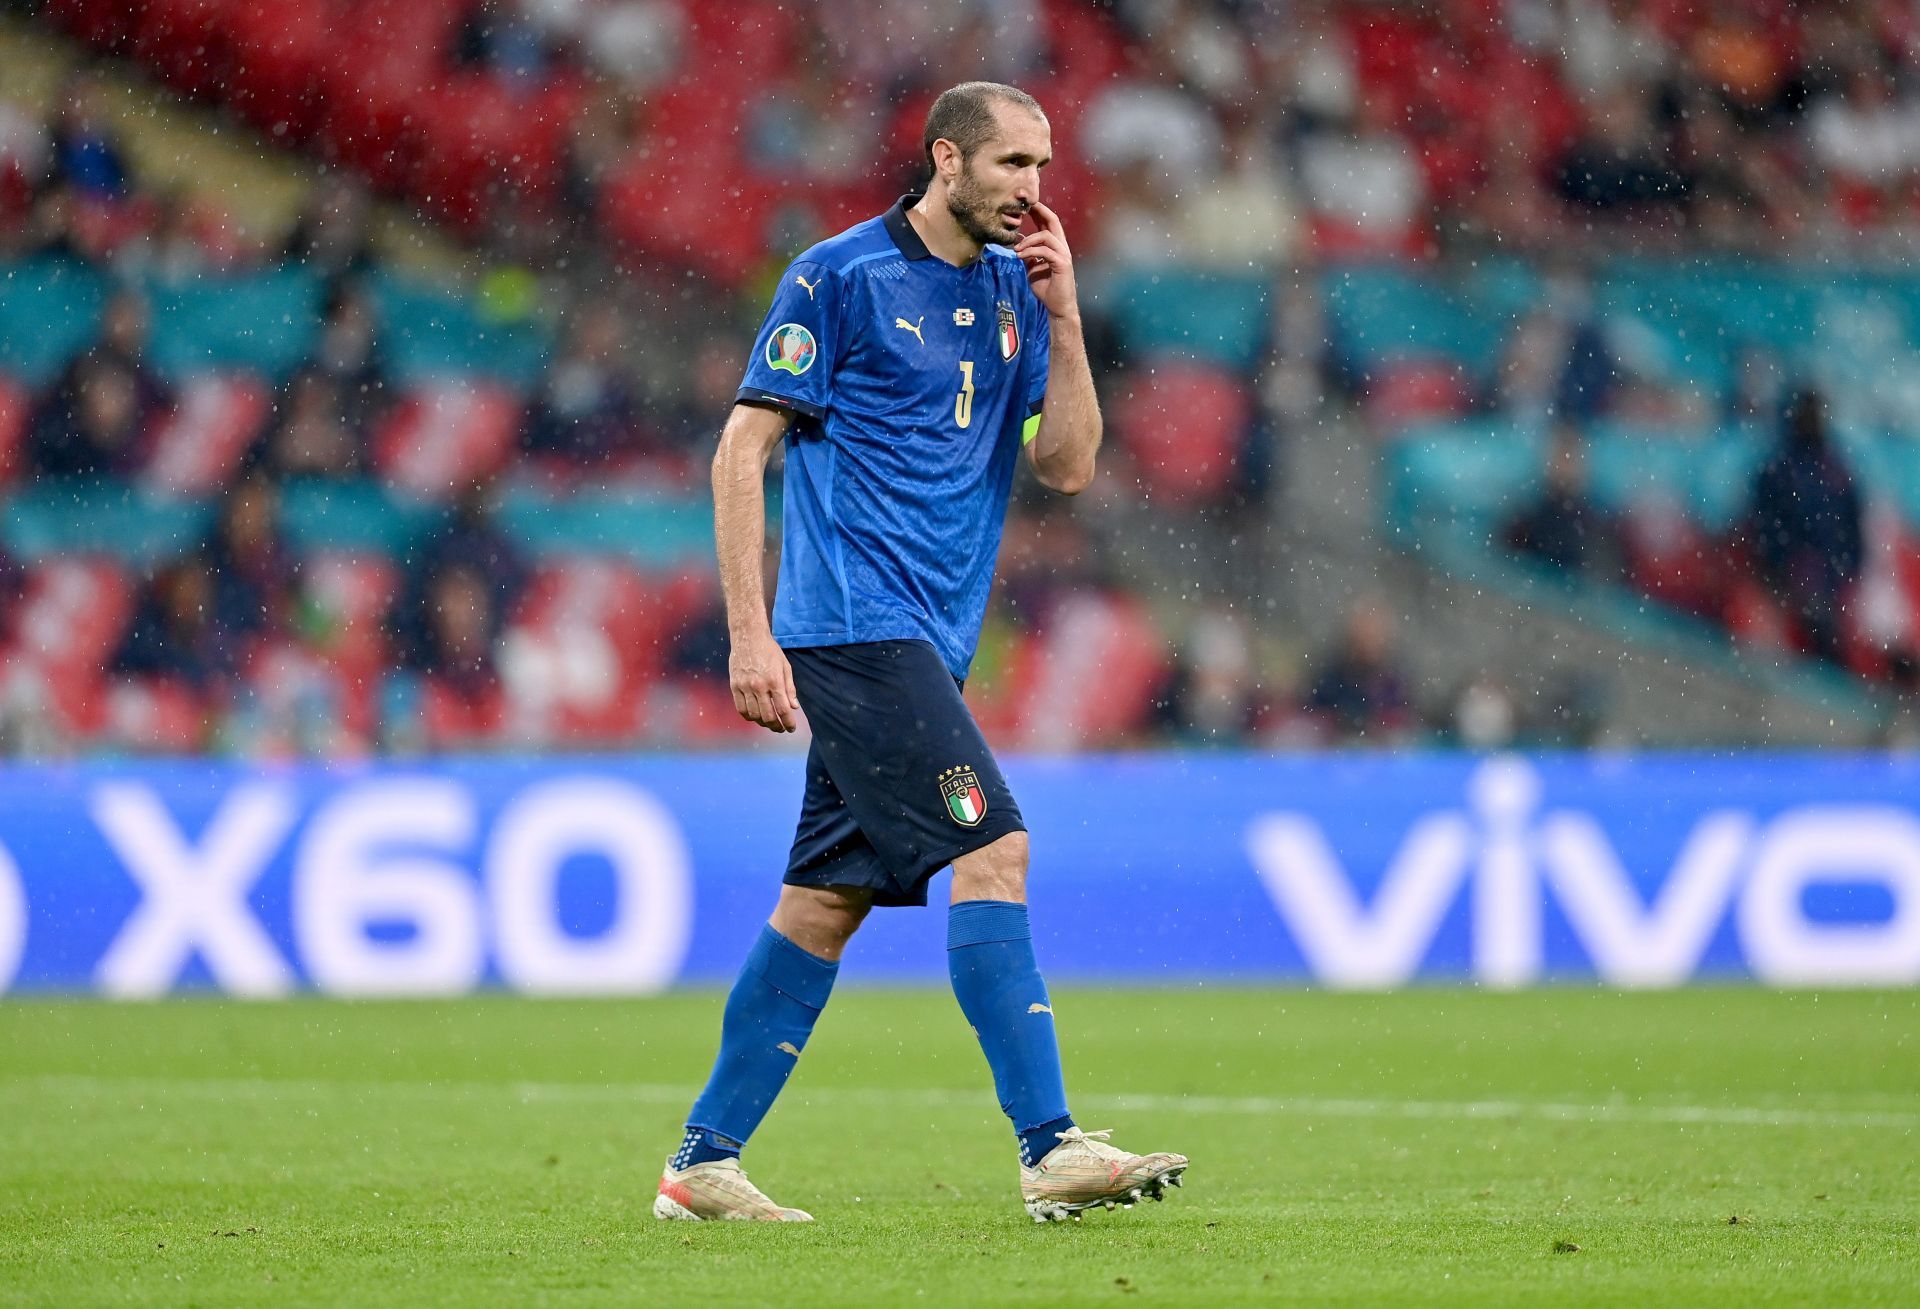 Chiellini played an integral role for Italy at Euro 2020